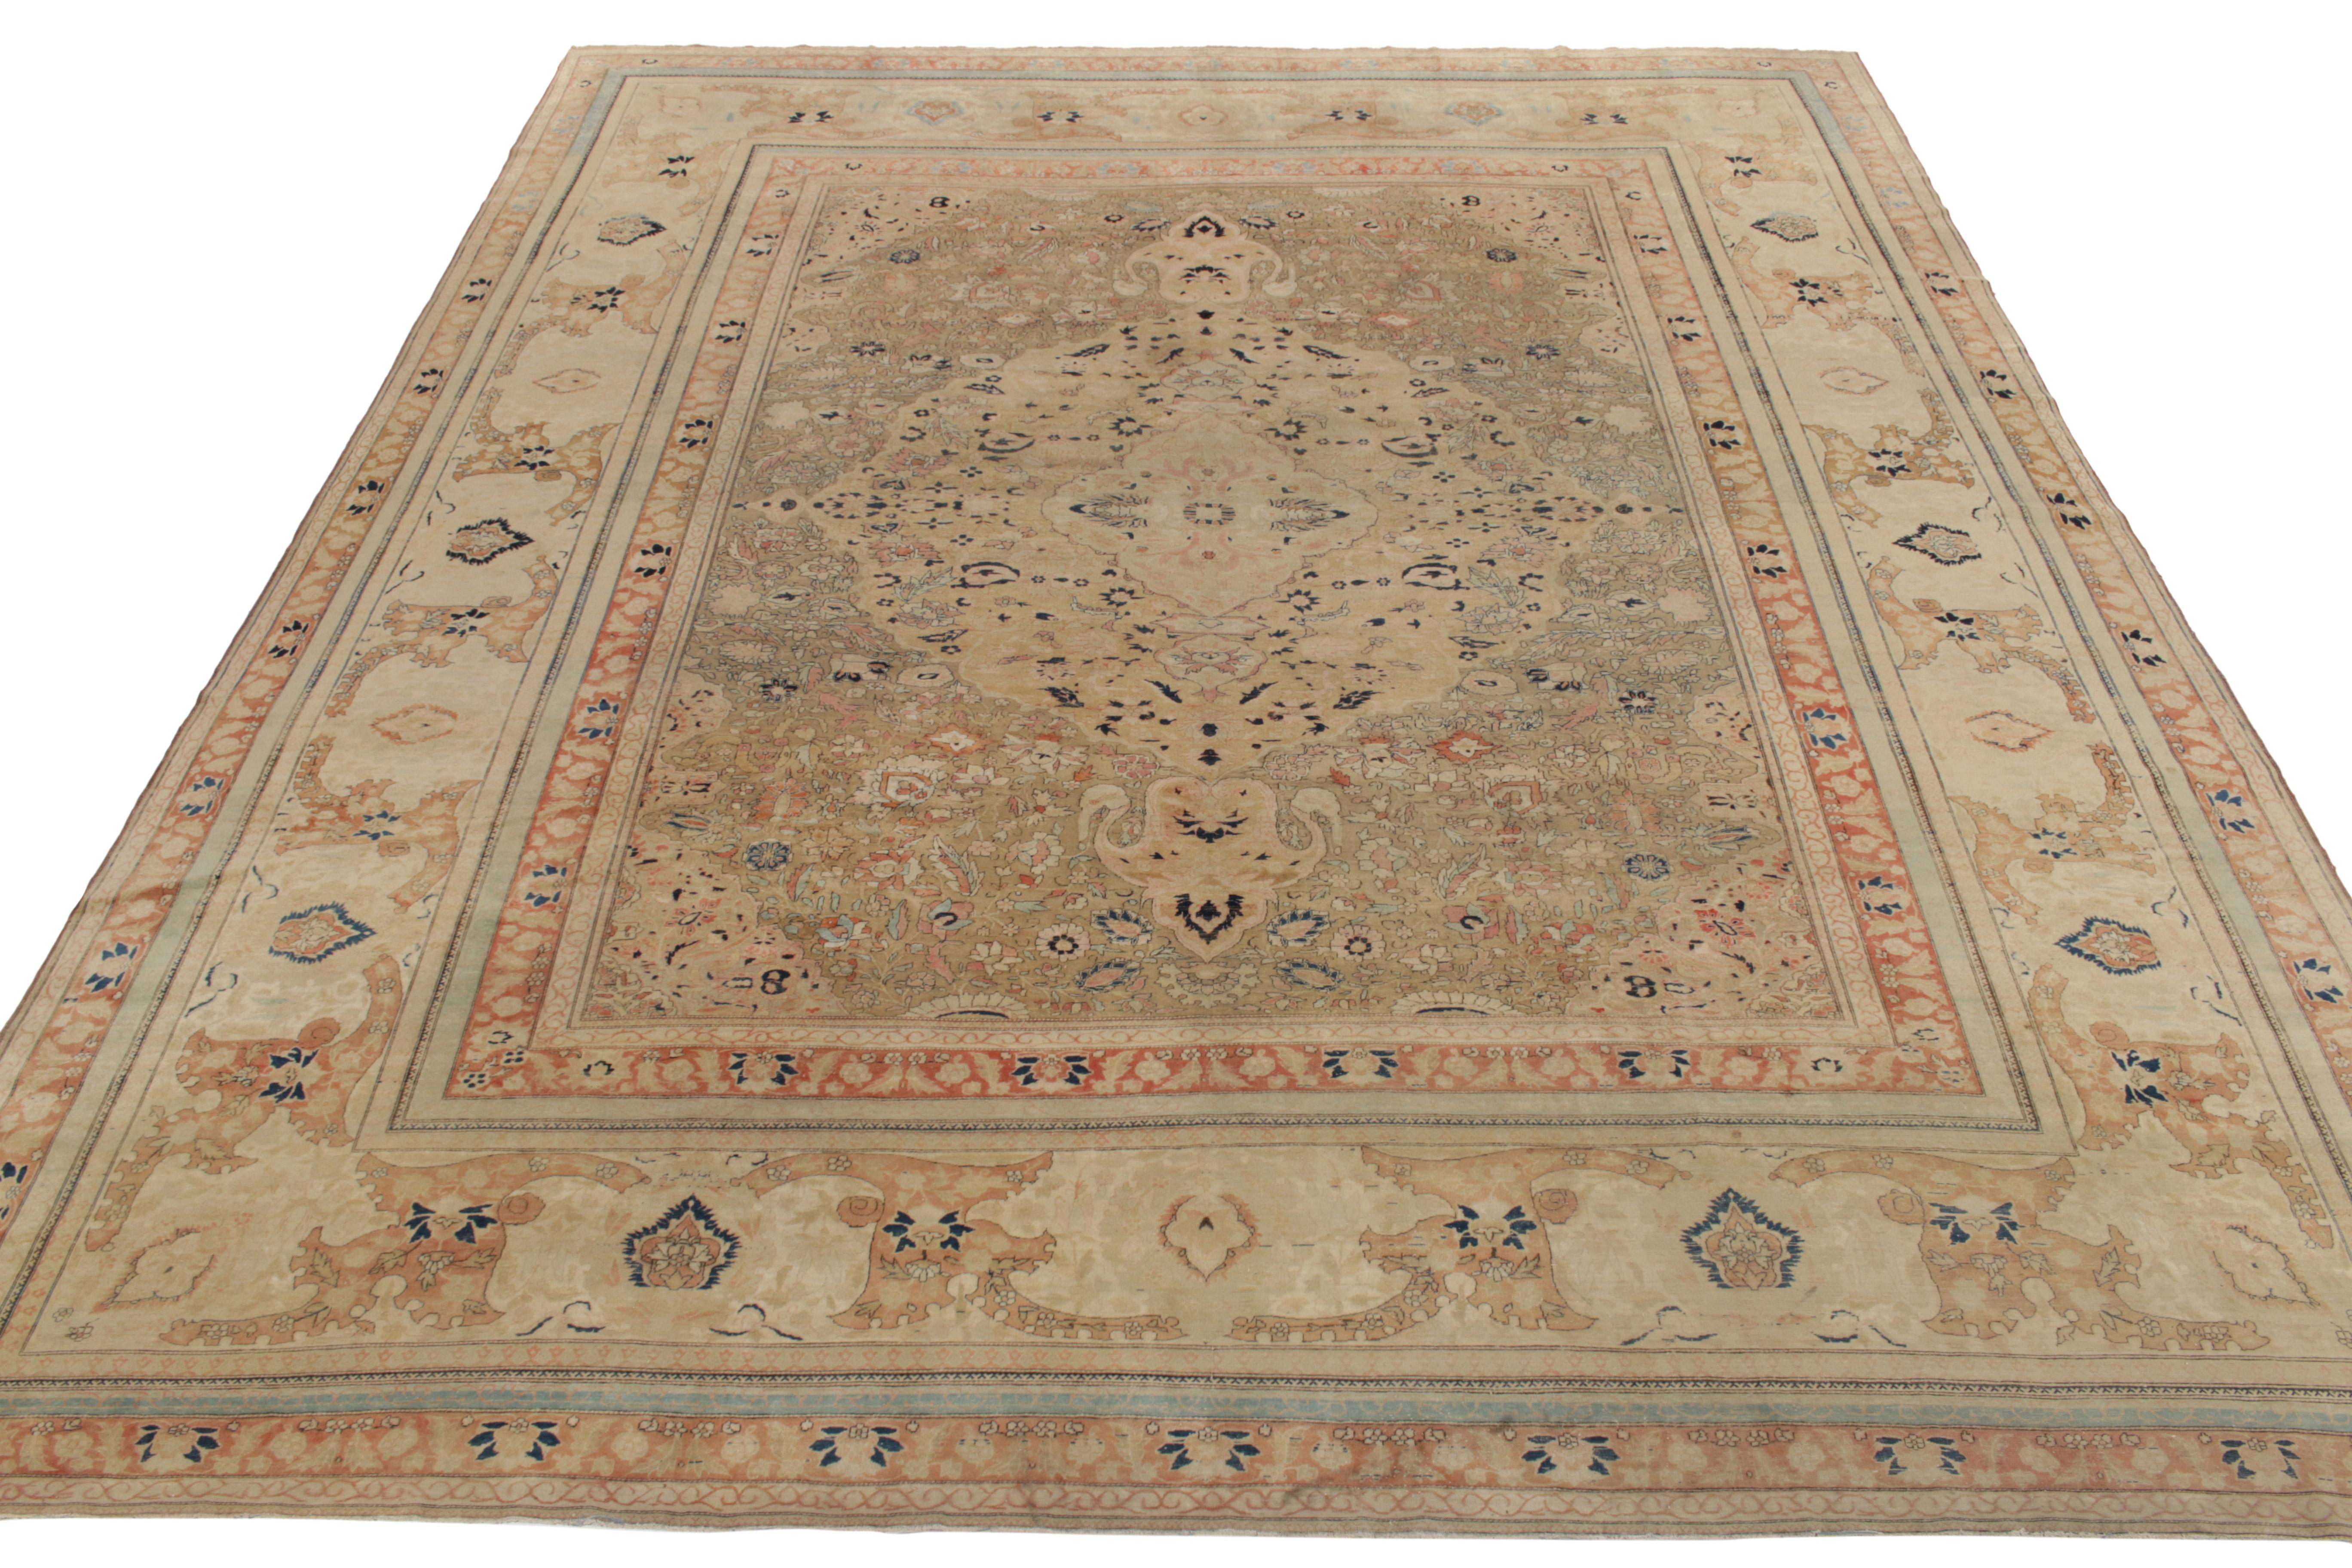 Hand-knotted in wool circa 1890,1900, one of the finest antique Mohtashem Kashan rugs ever to join our Antique & Vintage Persian rug lines. A collectible, versatile 12x15 in pristine condition, this particular transitional piece enjoys soft colors